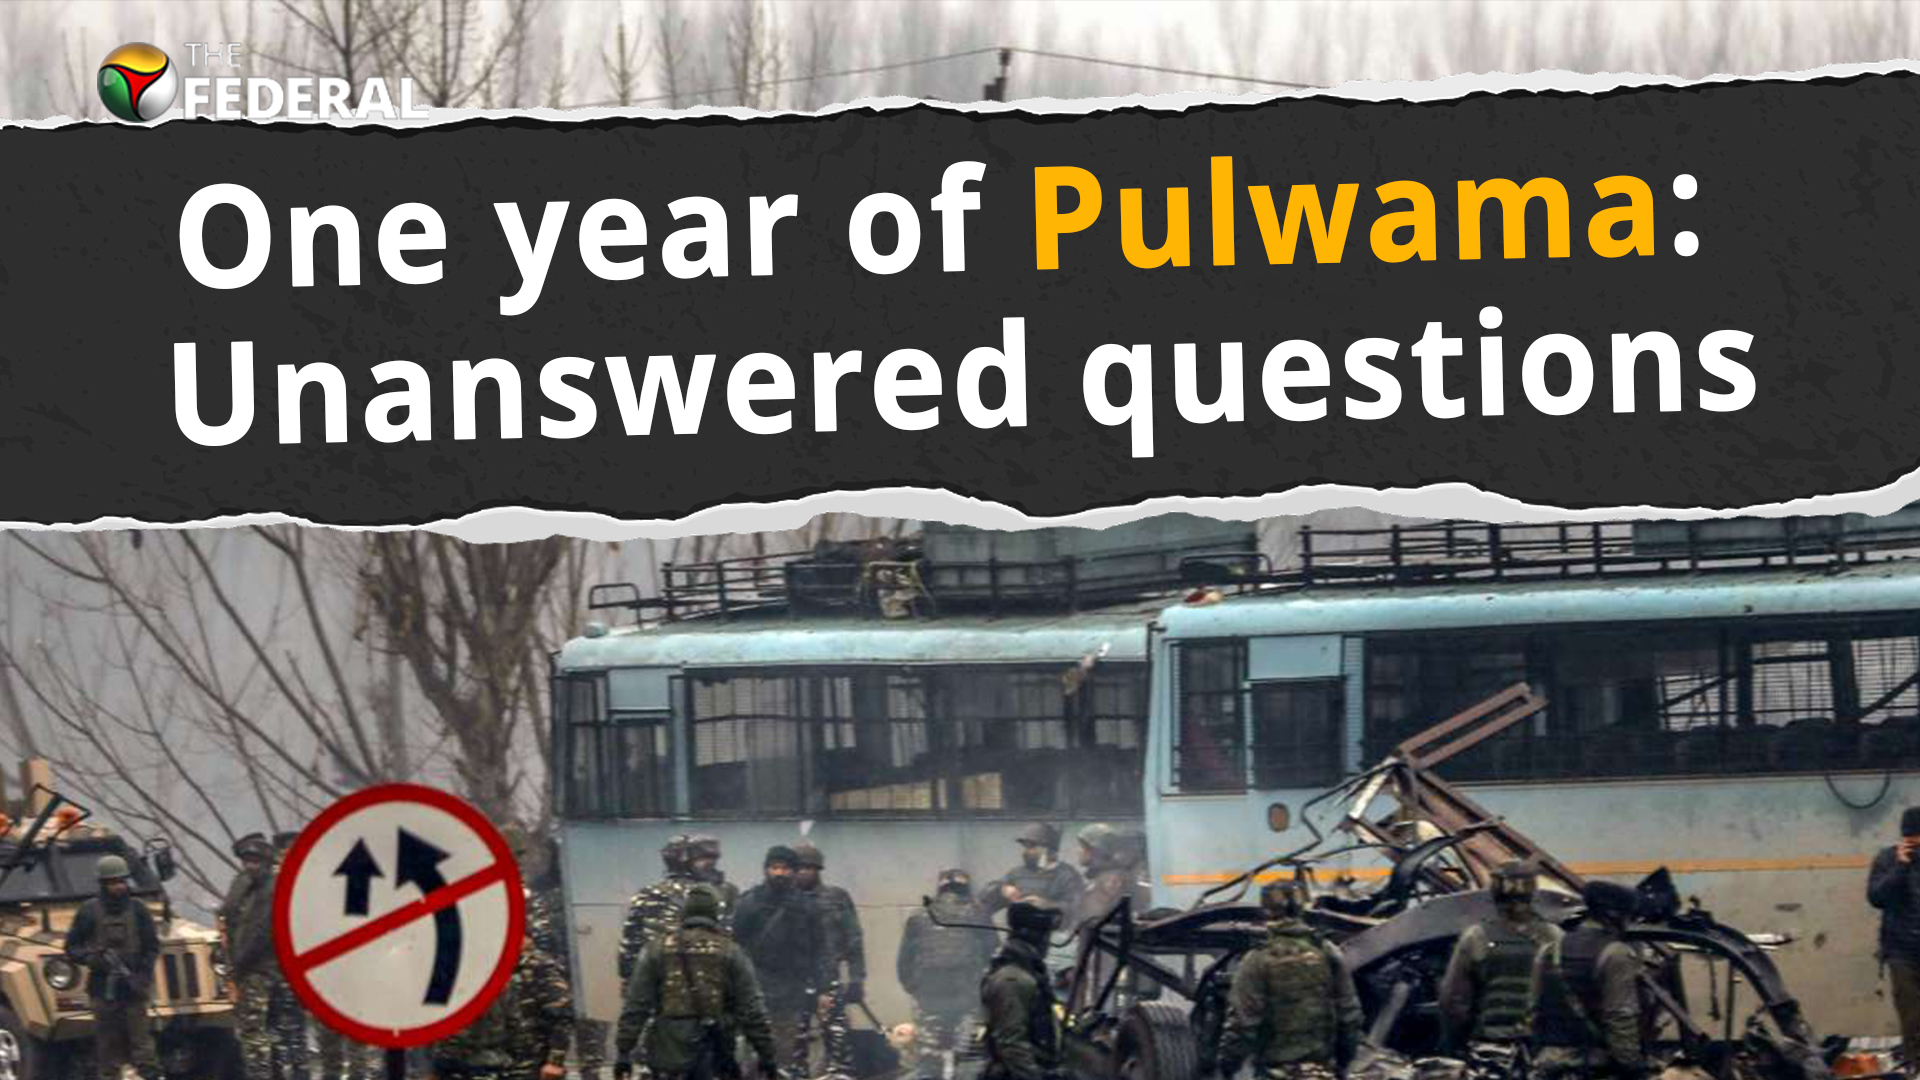 One year of Pulwama: Many questions still remain unanswered